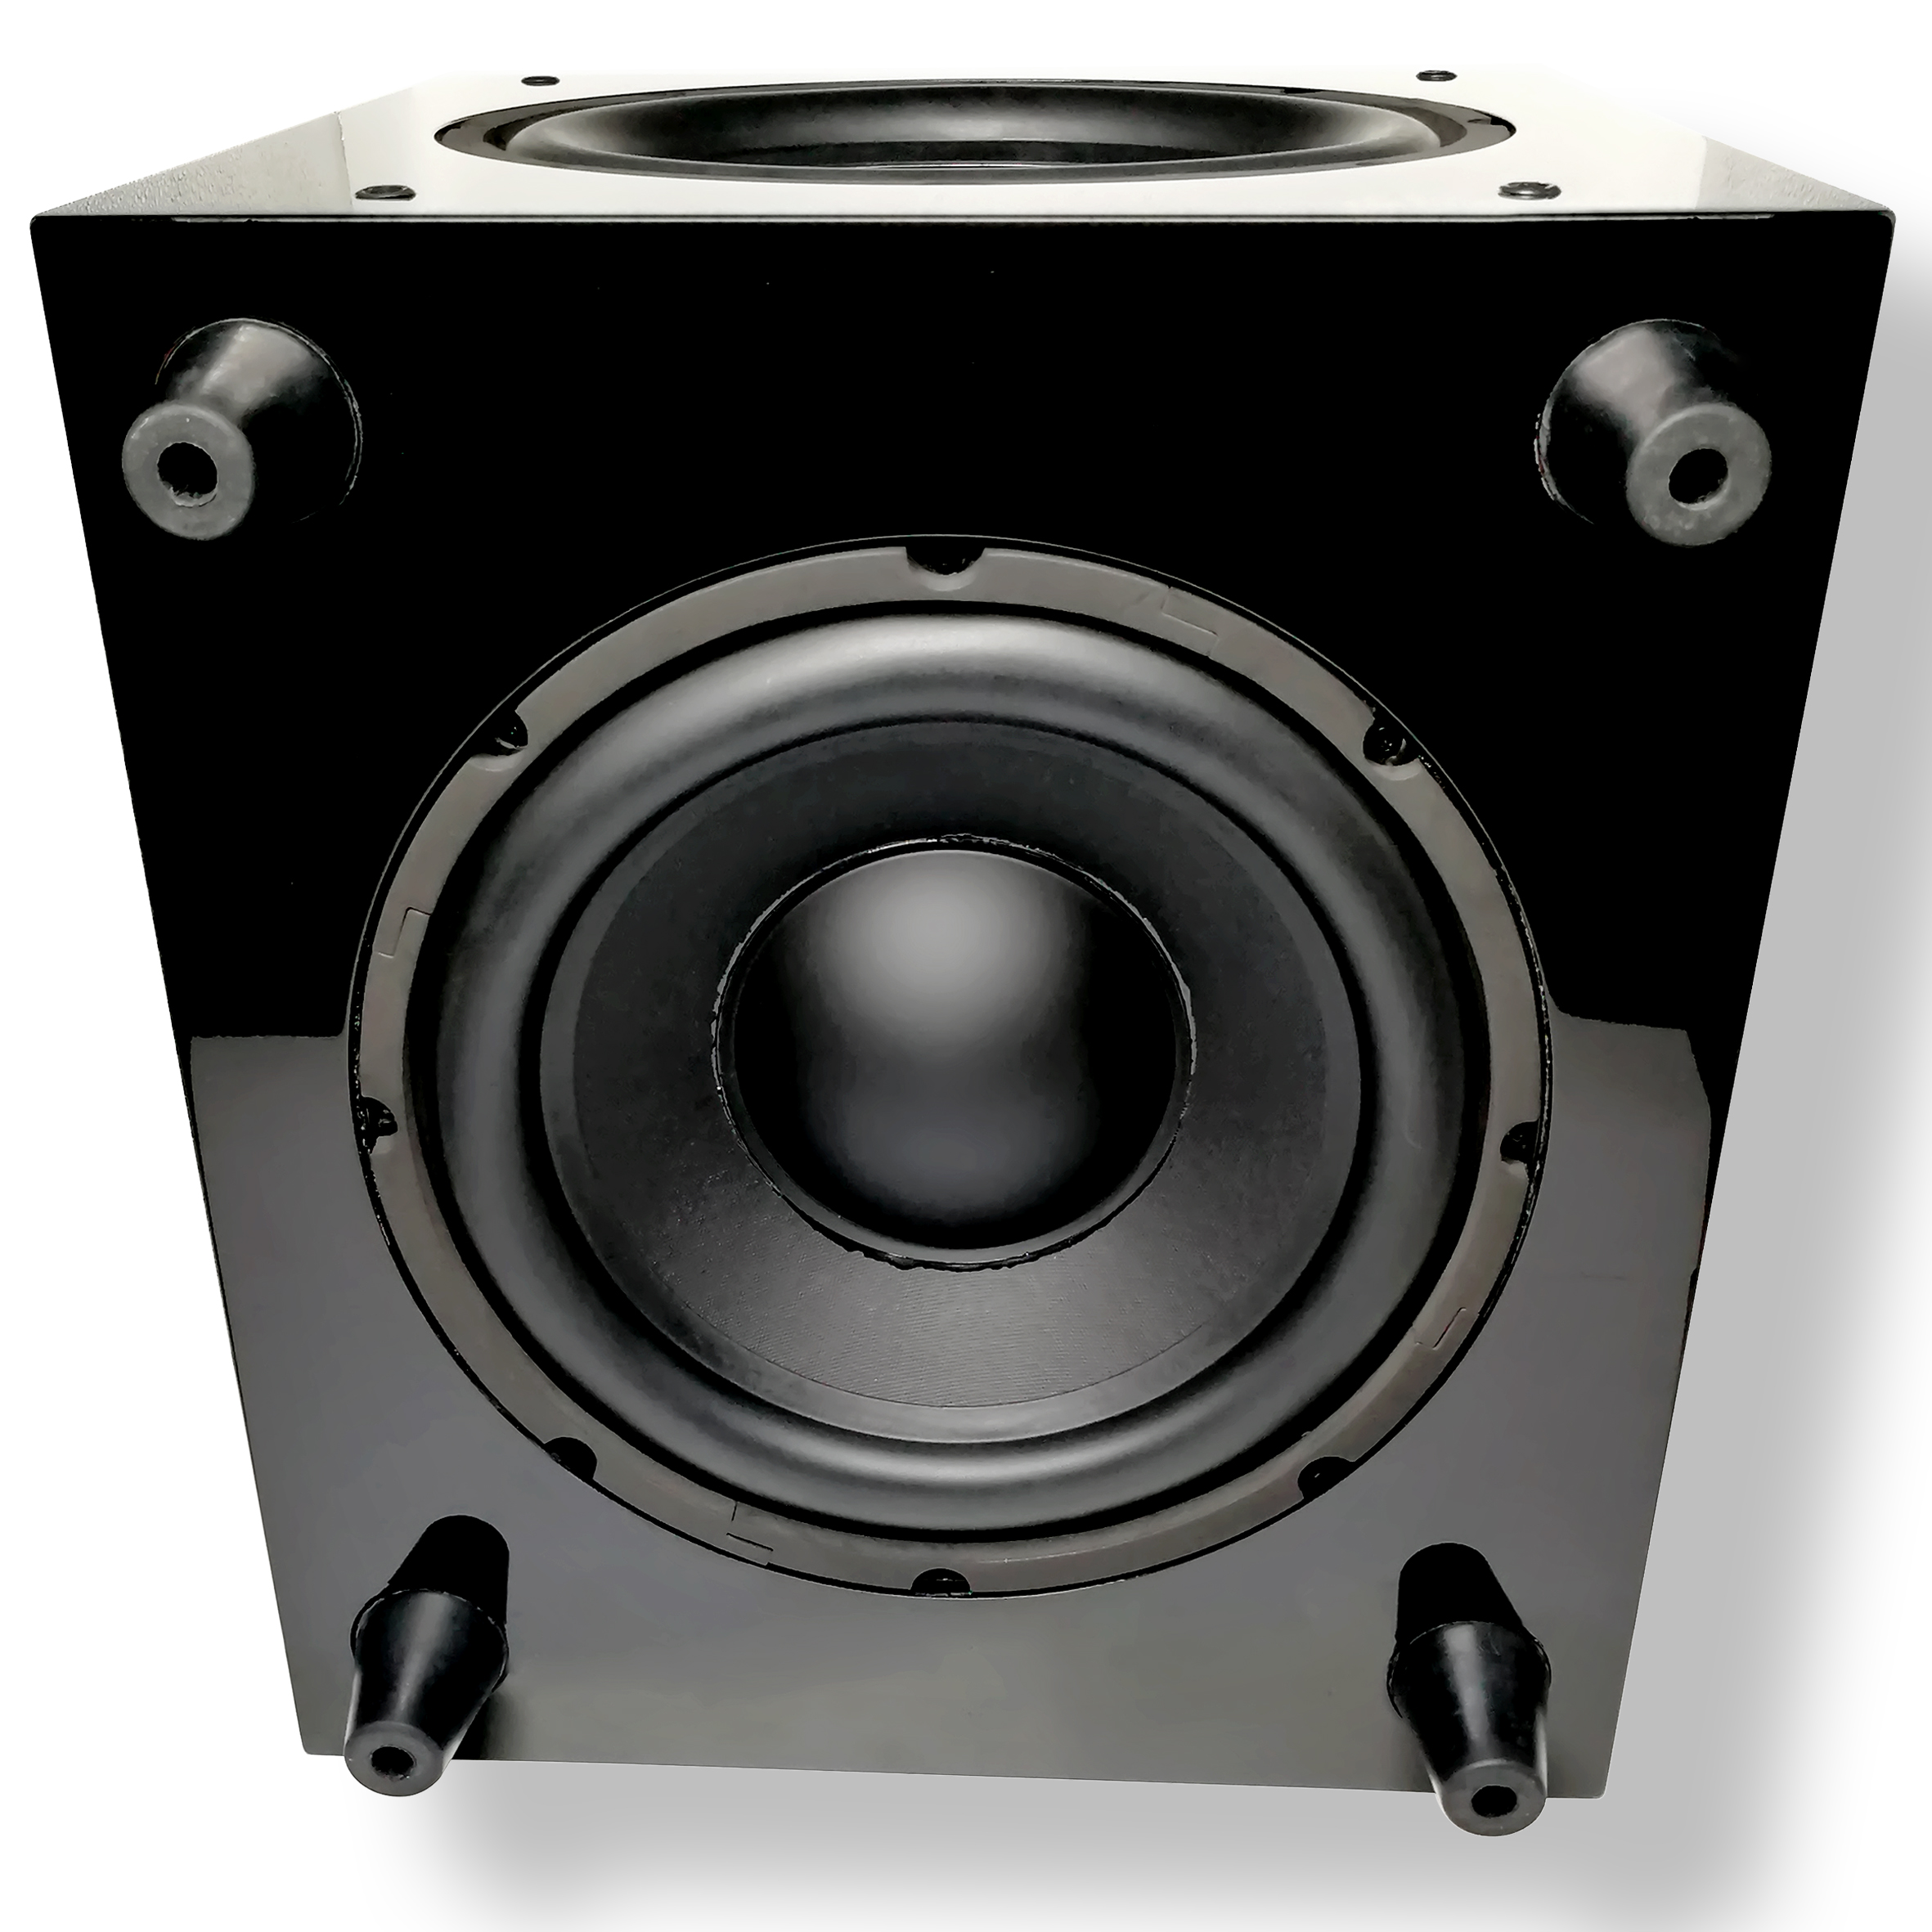 12 inch Subwoofer for home theater